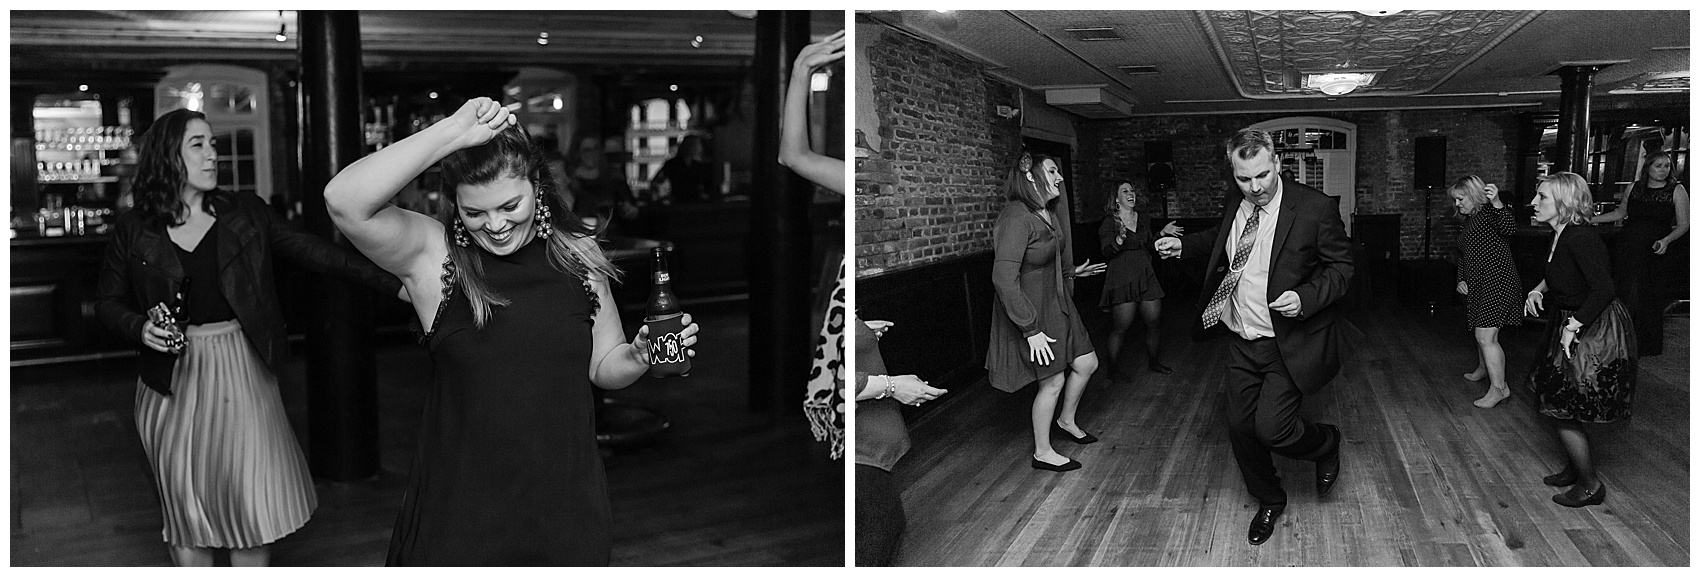 dancing at a wedding reception in downtown charleston